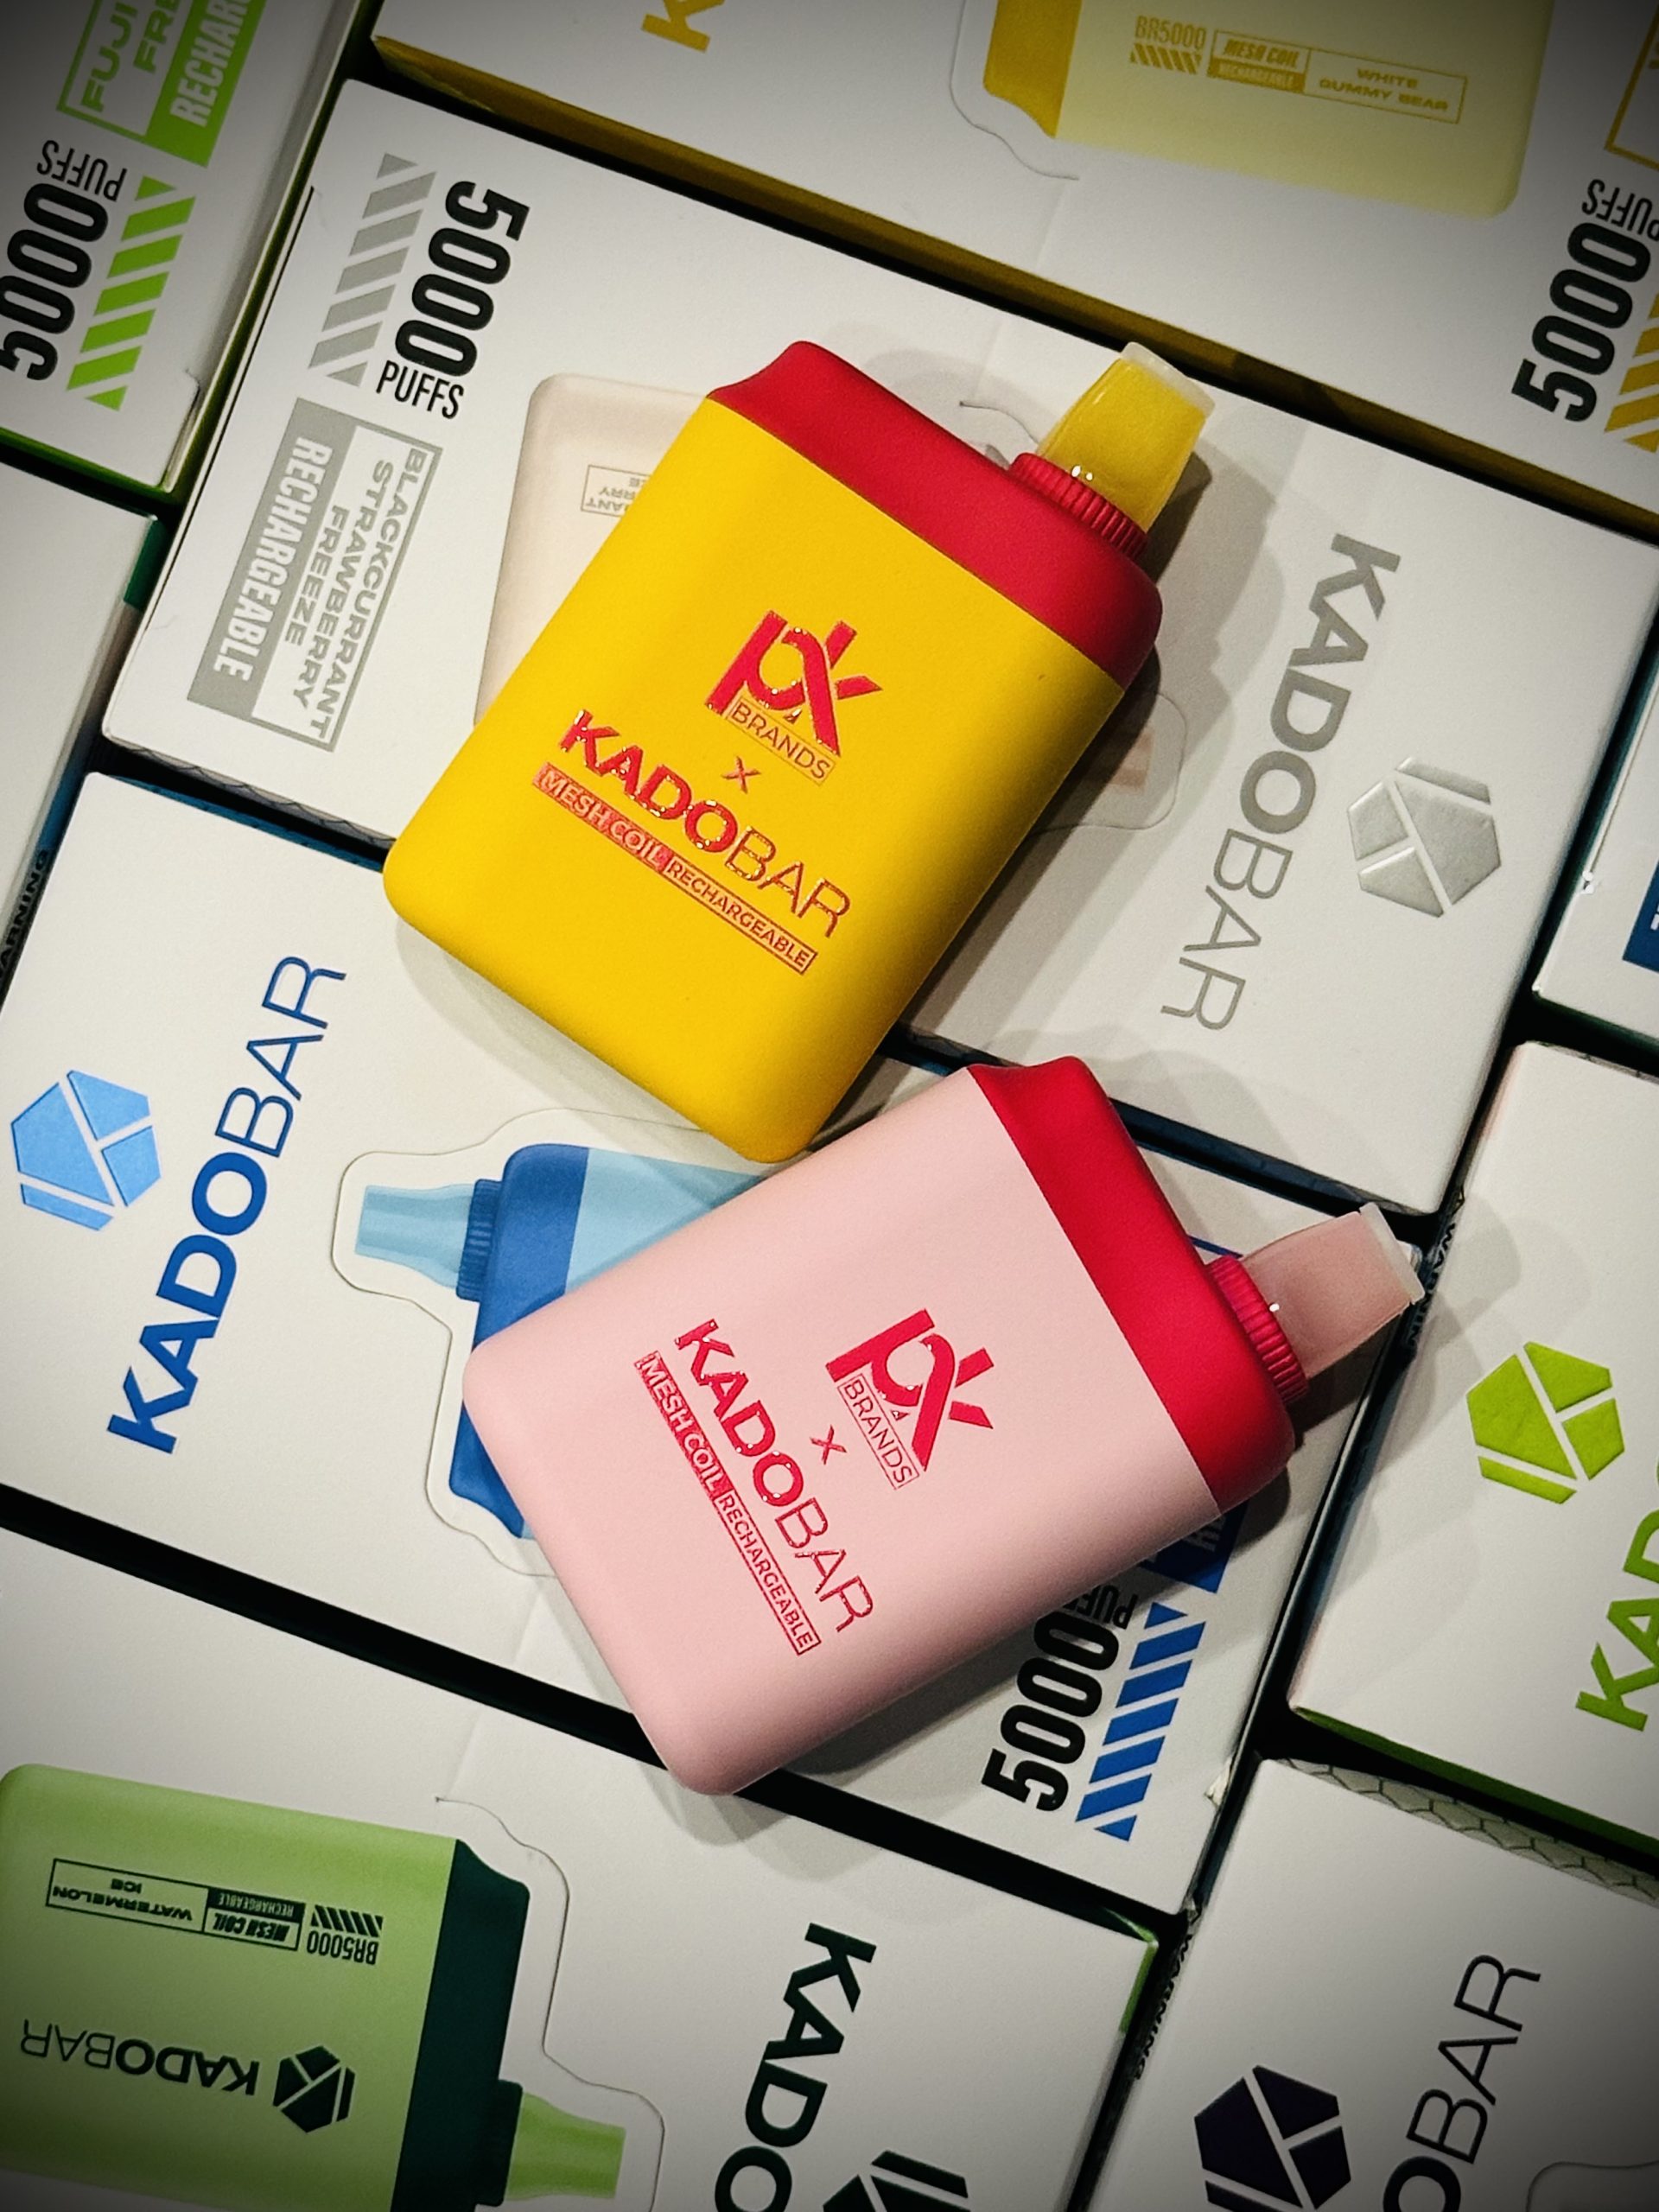 An image of two Kado Bar disposable vape devices in yellow and pink, prominently displayed among various packaging boxes. The boxes have a clean design with the text 